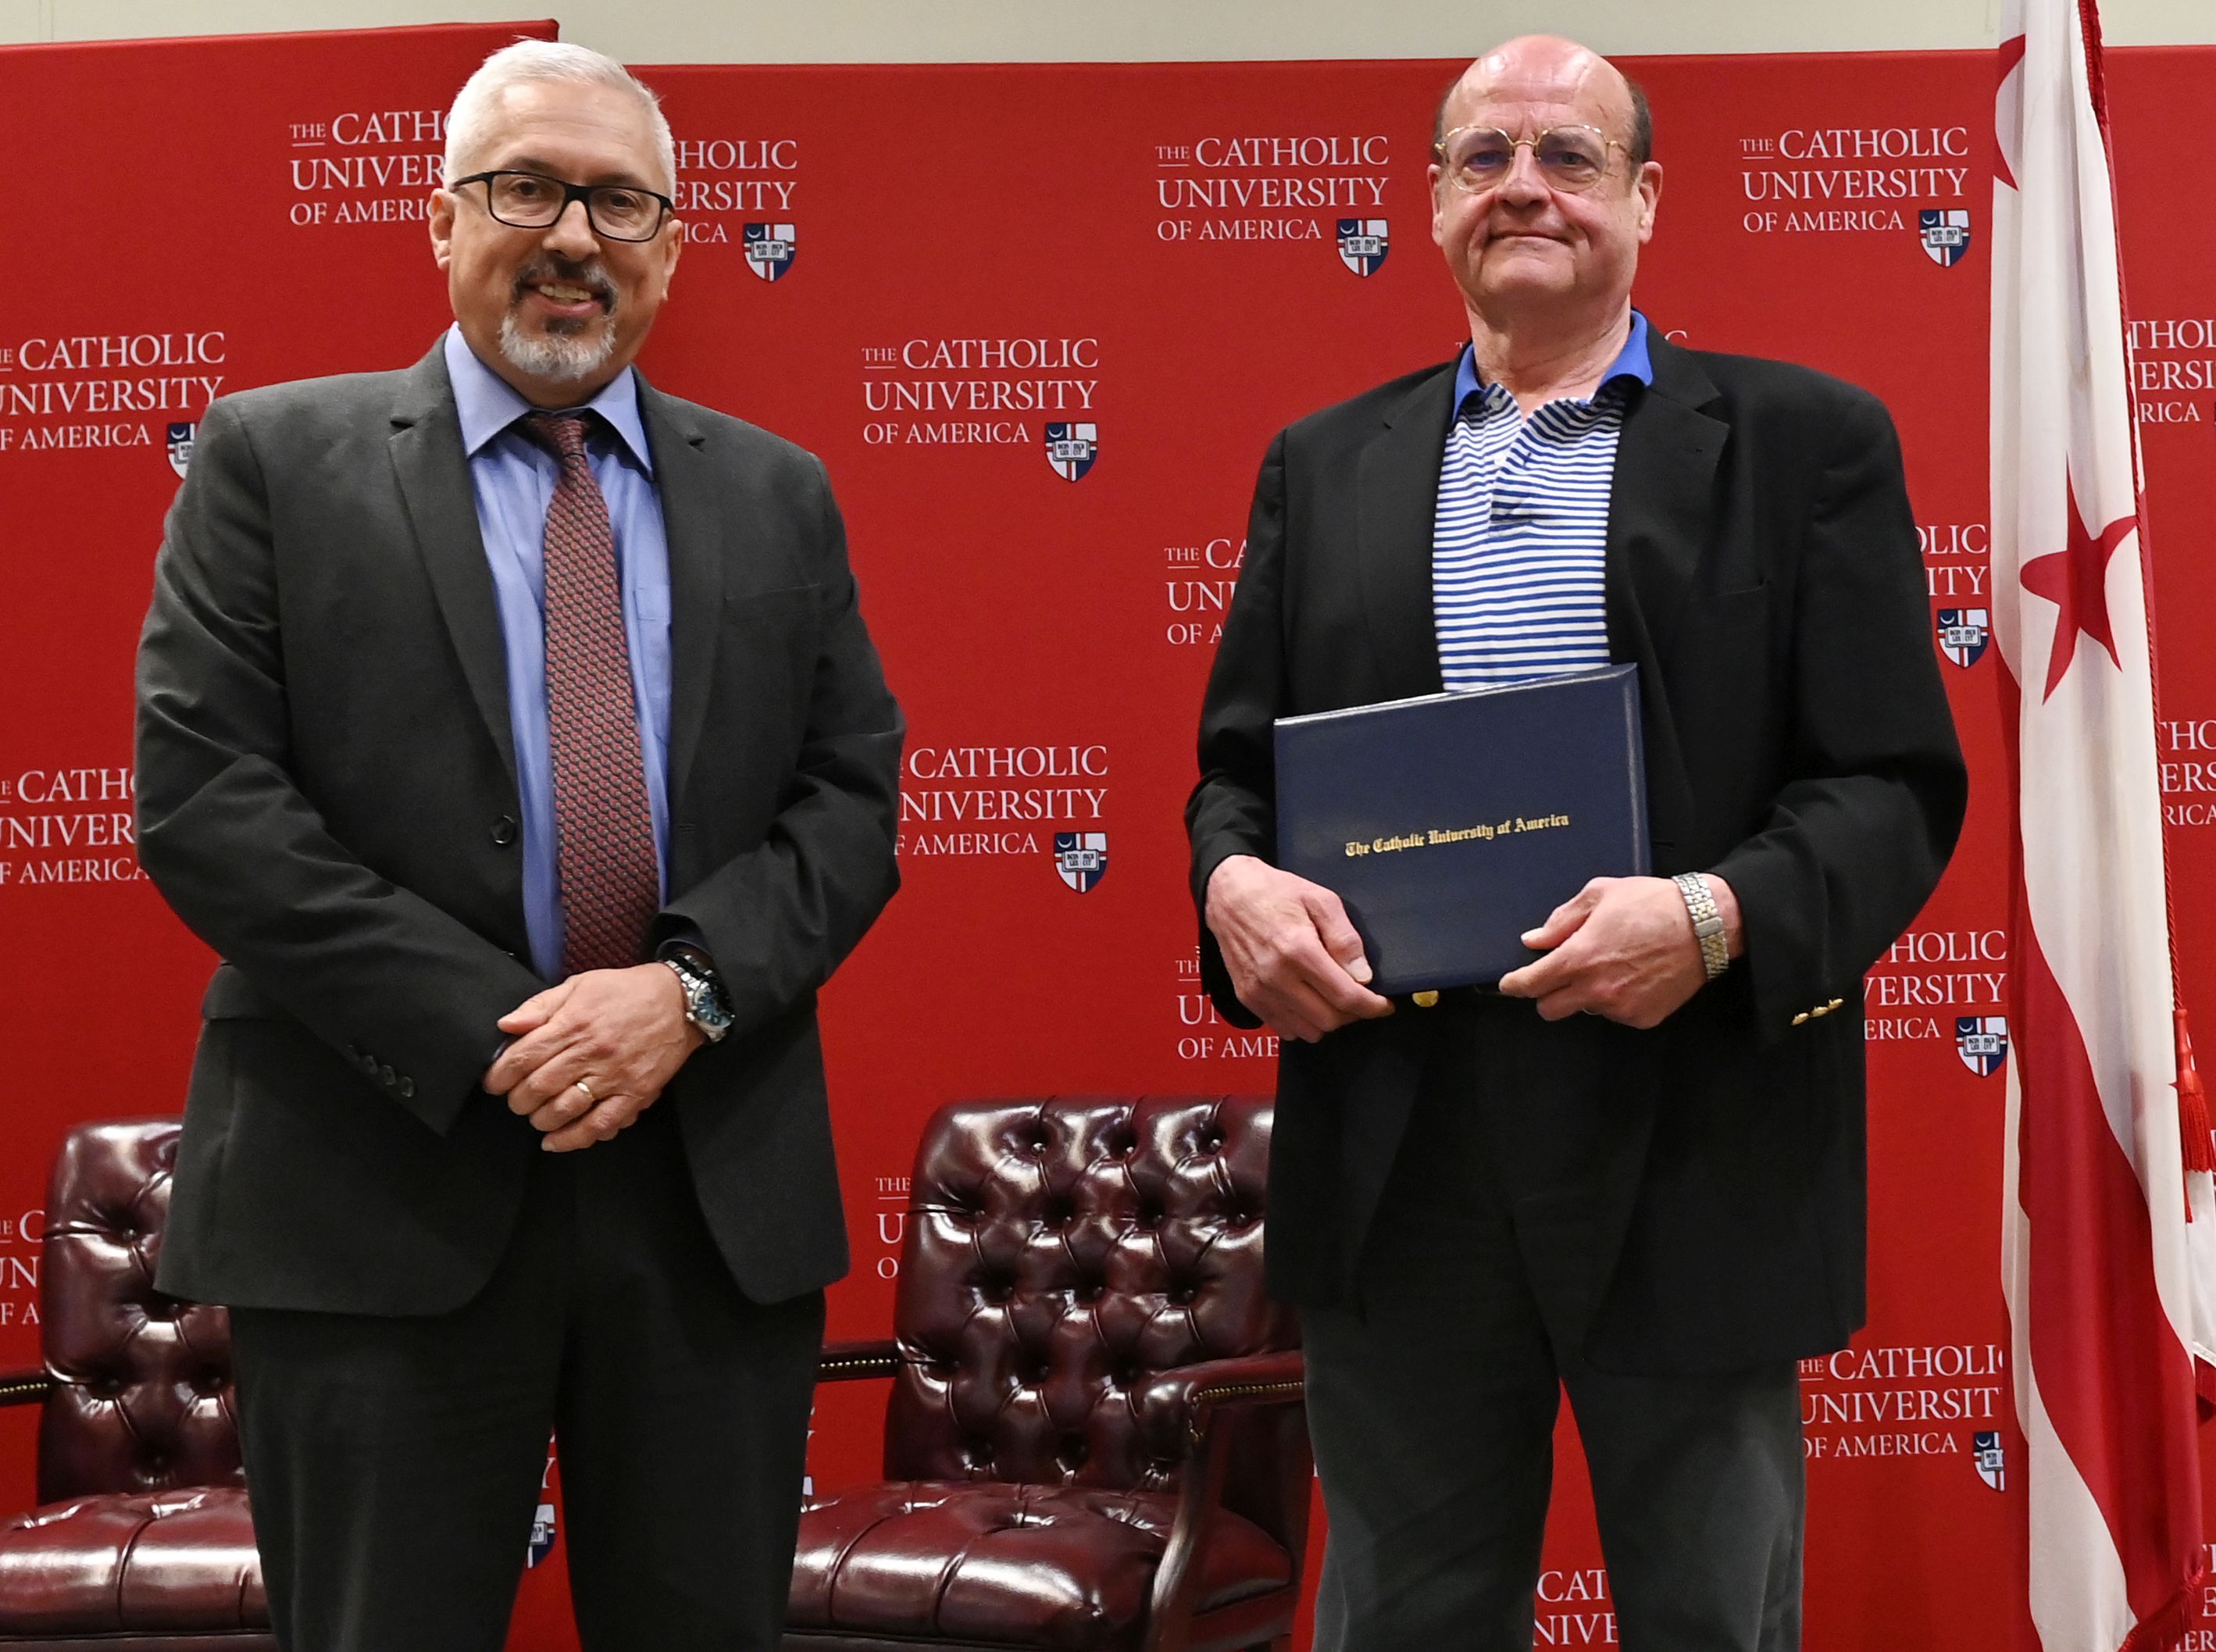 Professor Poos Honored with Provost’s Teaching Award